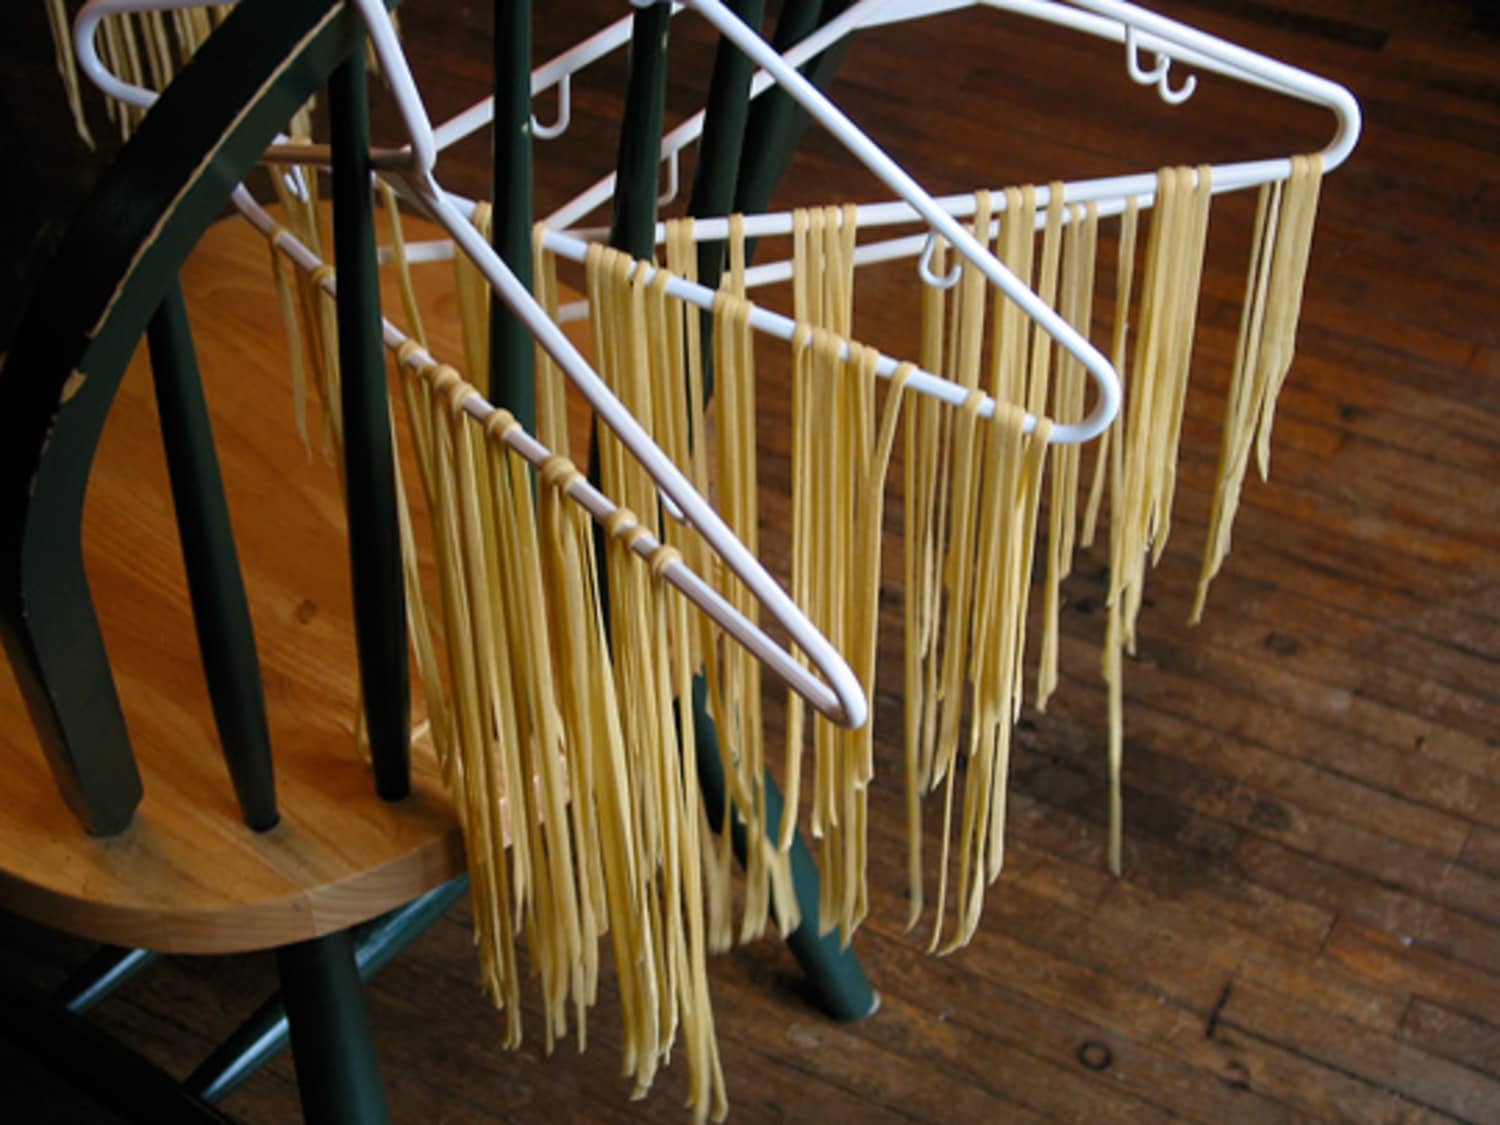 How To Dry Pasta Without a Rack